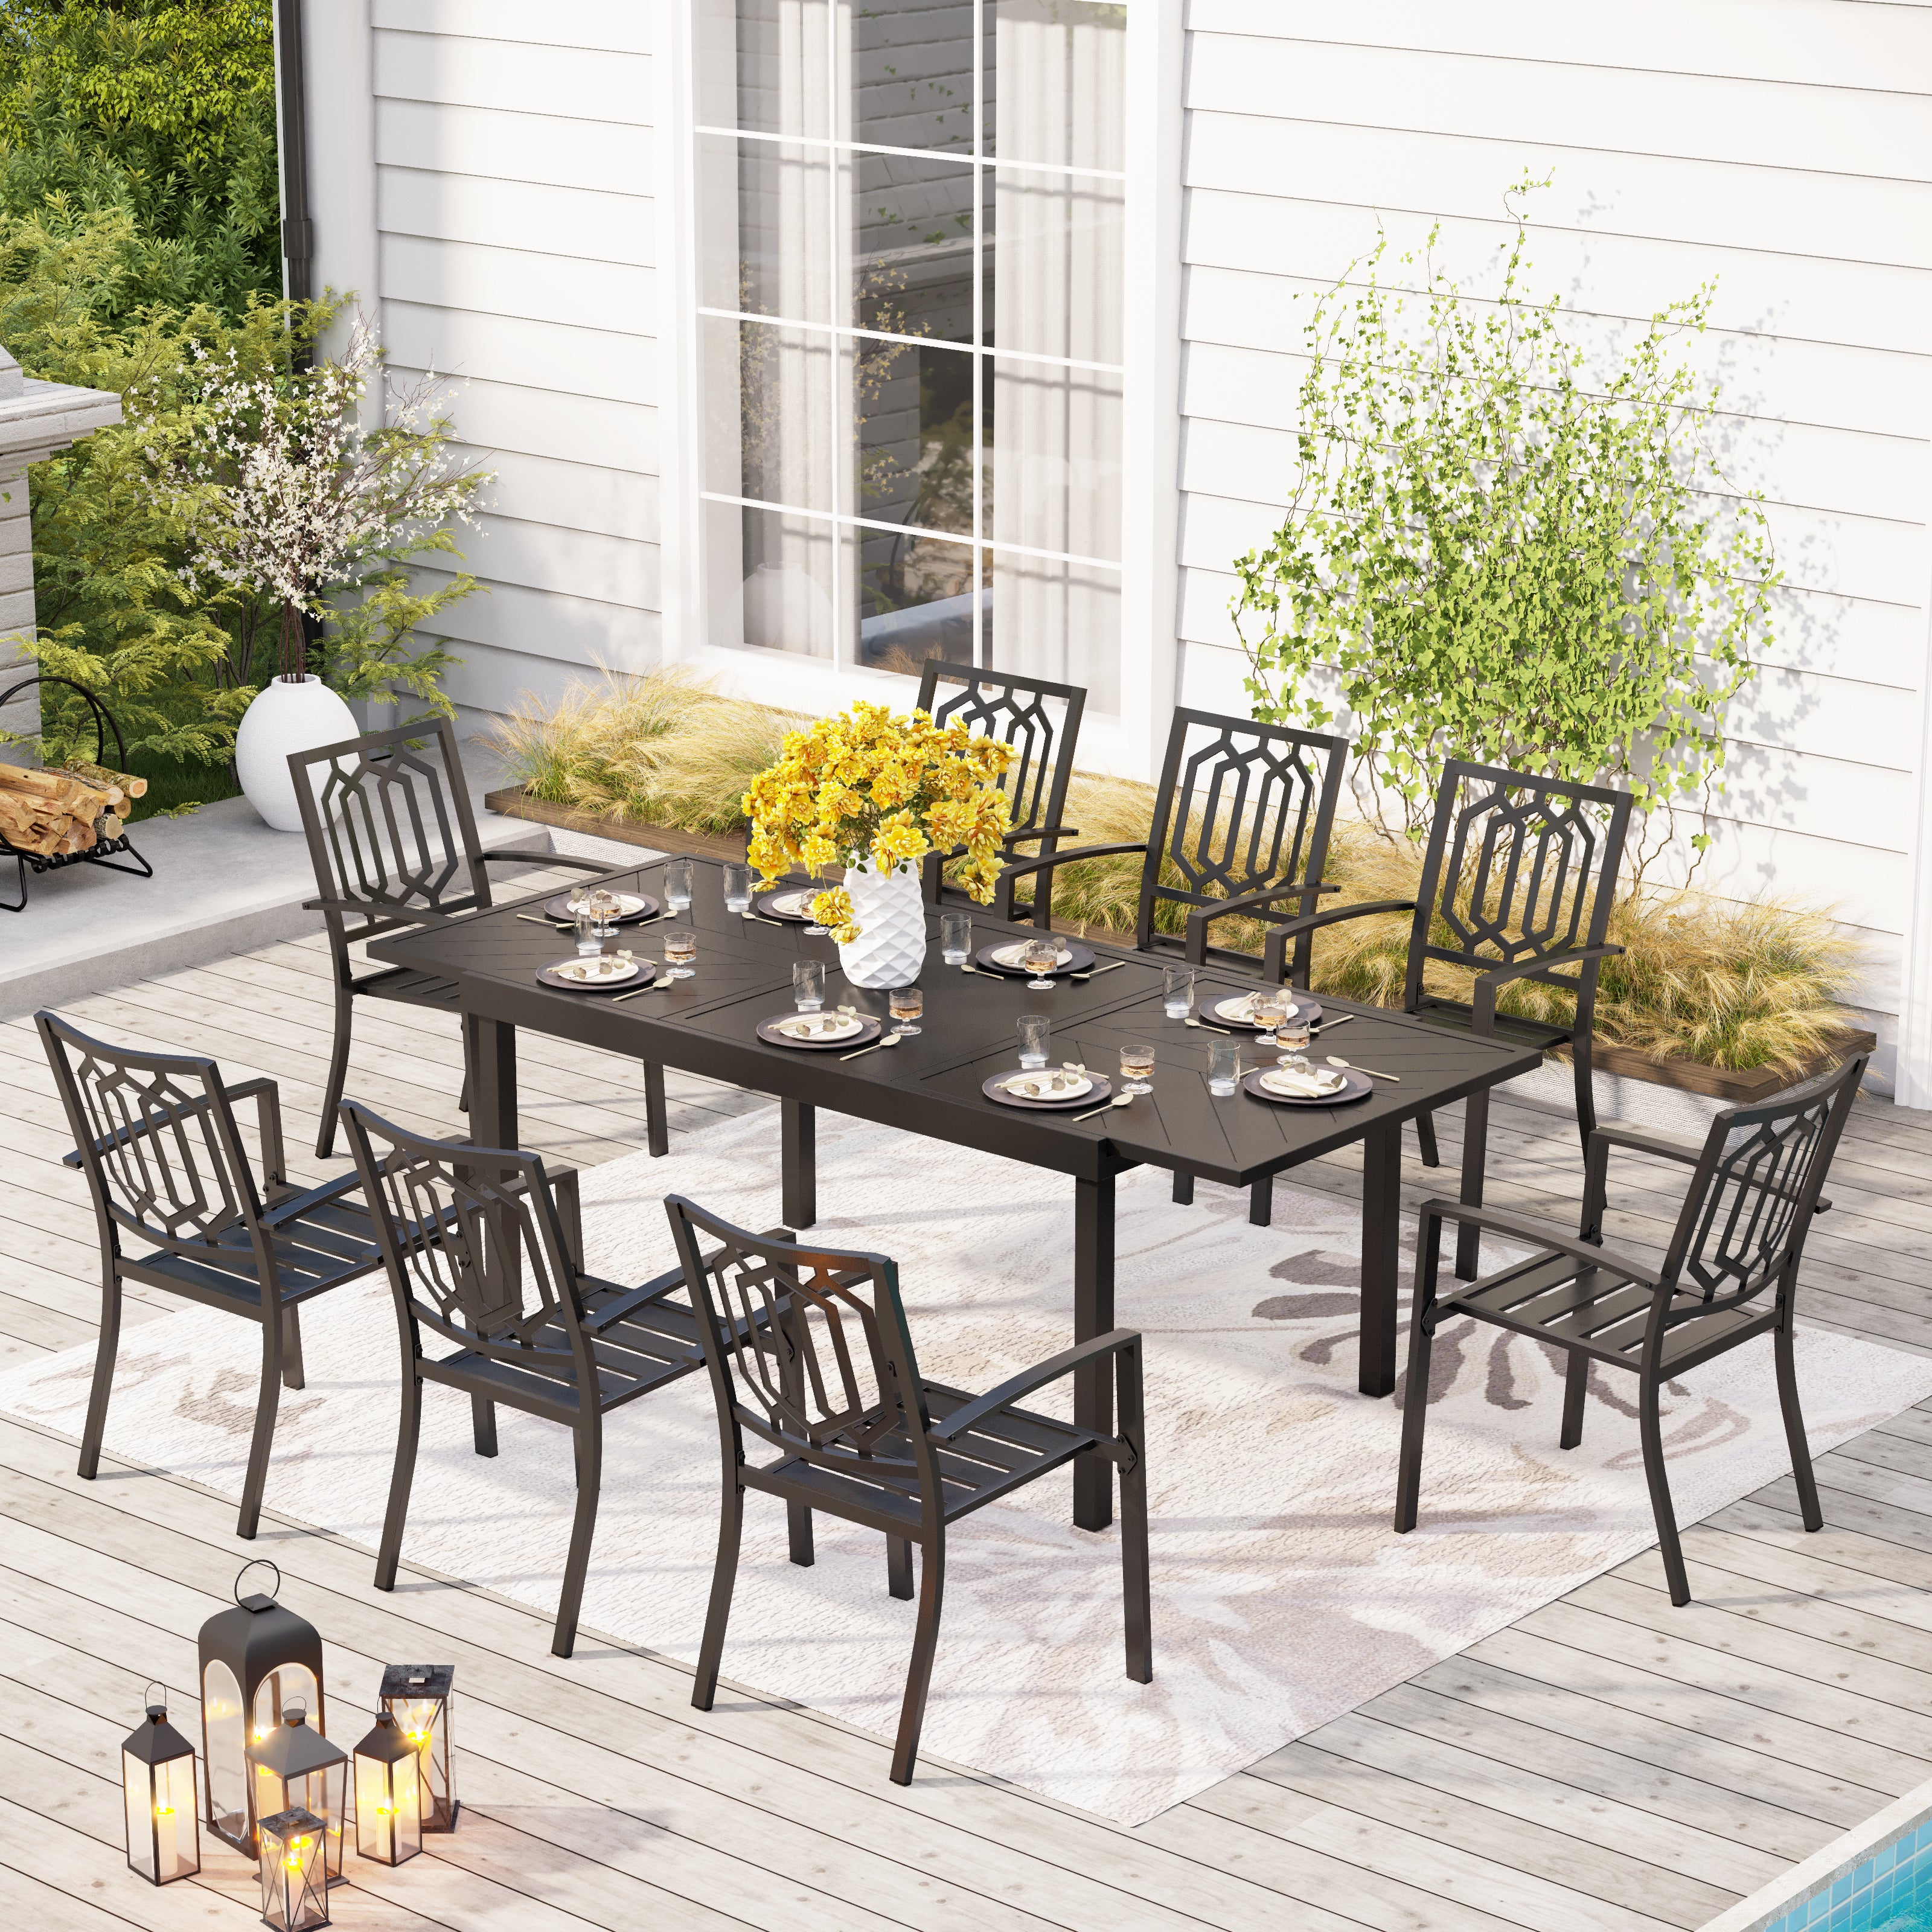 PHI VILLA 9-piece / 7-piece Patio Dining Sets Expandable Table and Classic Steel Chairs